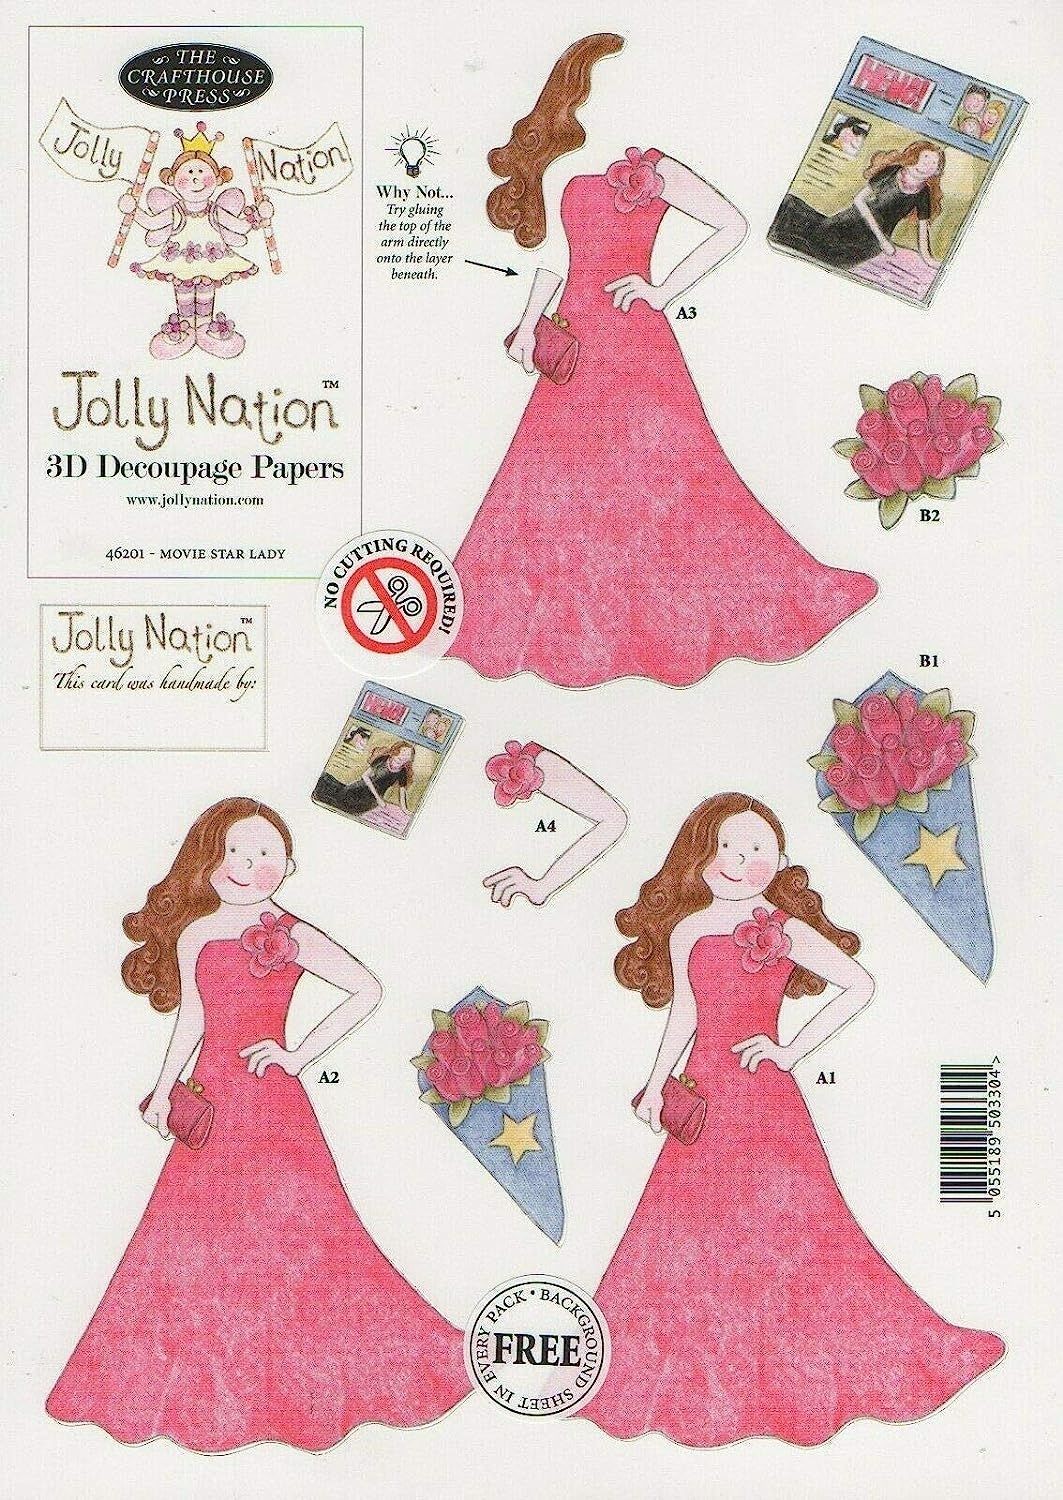 Jolly Nation - Movie Star Lady 46201 with FREE matching background paper